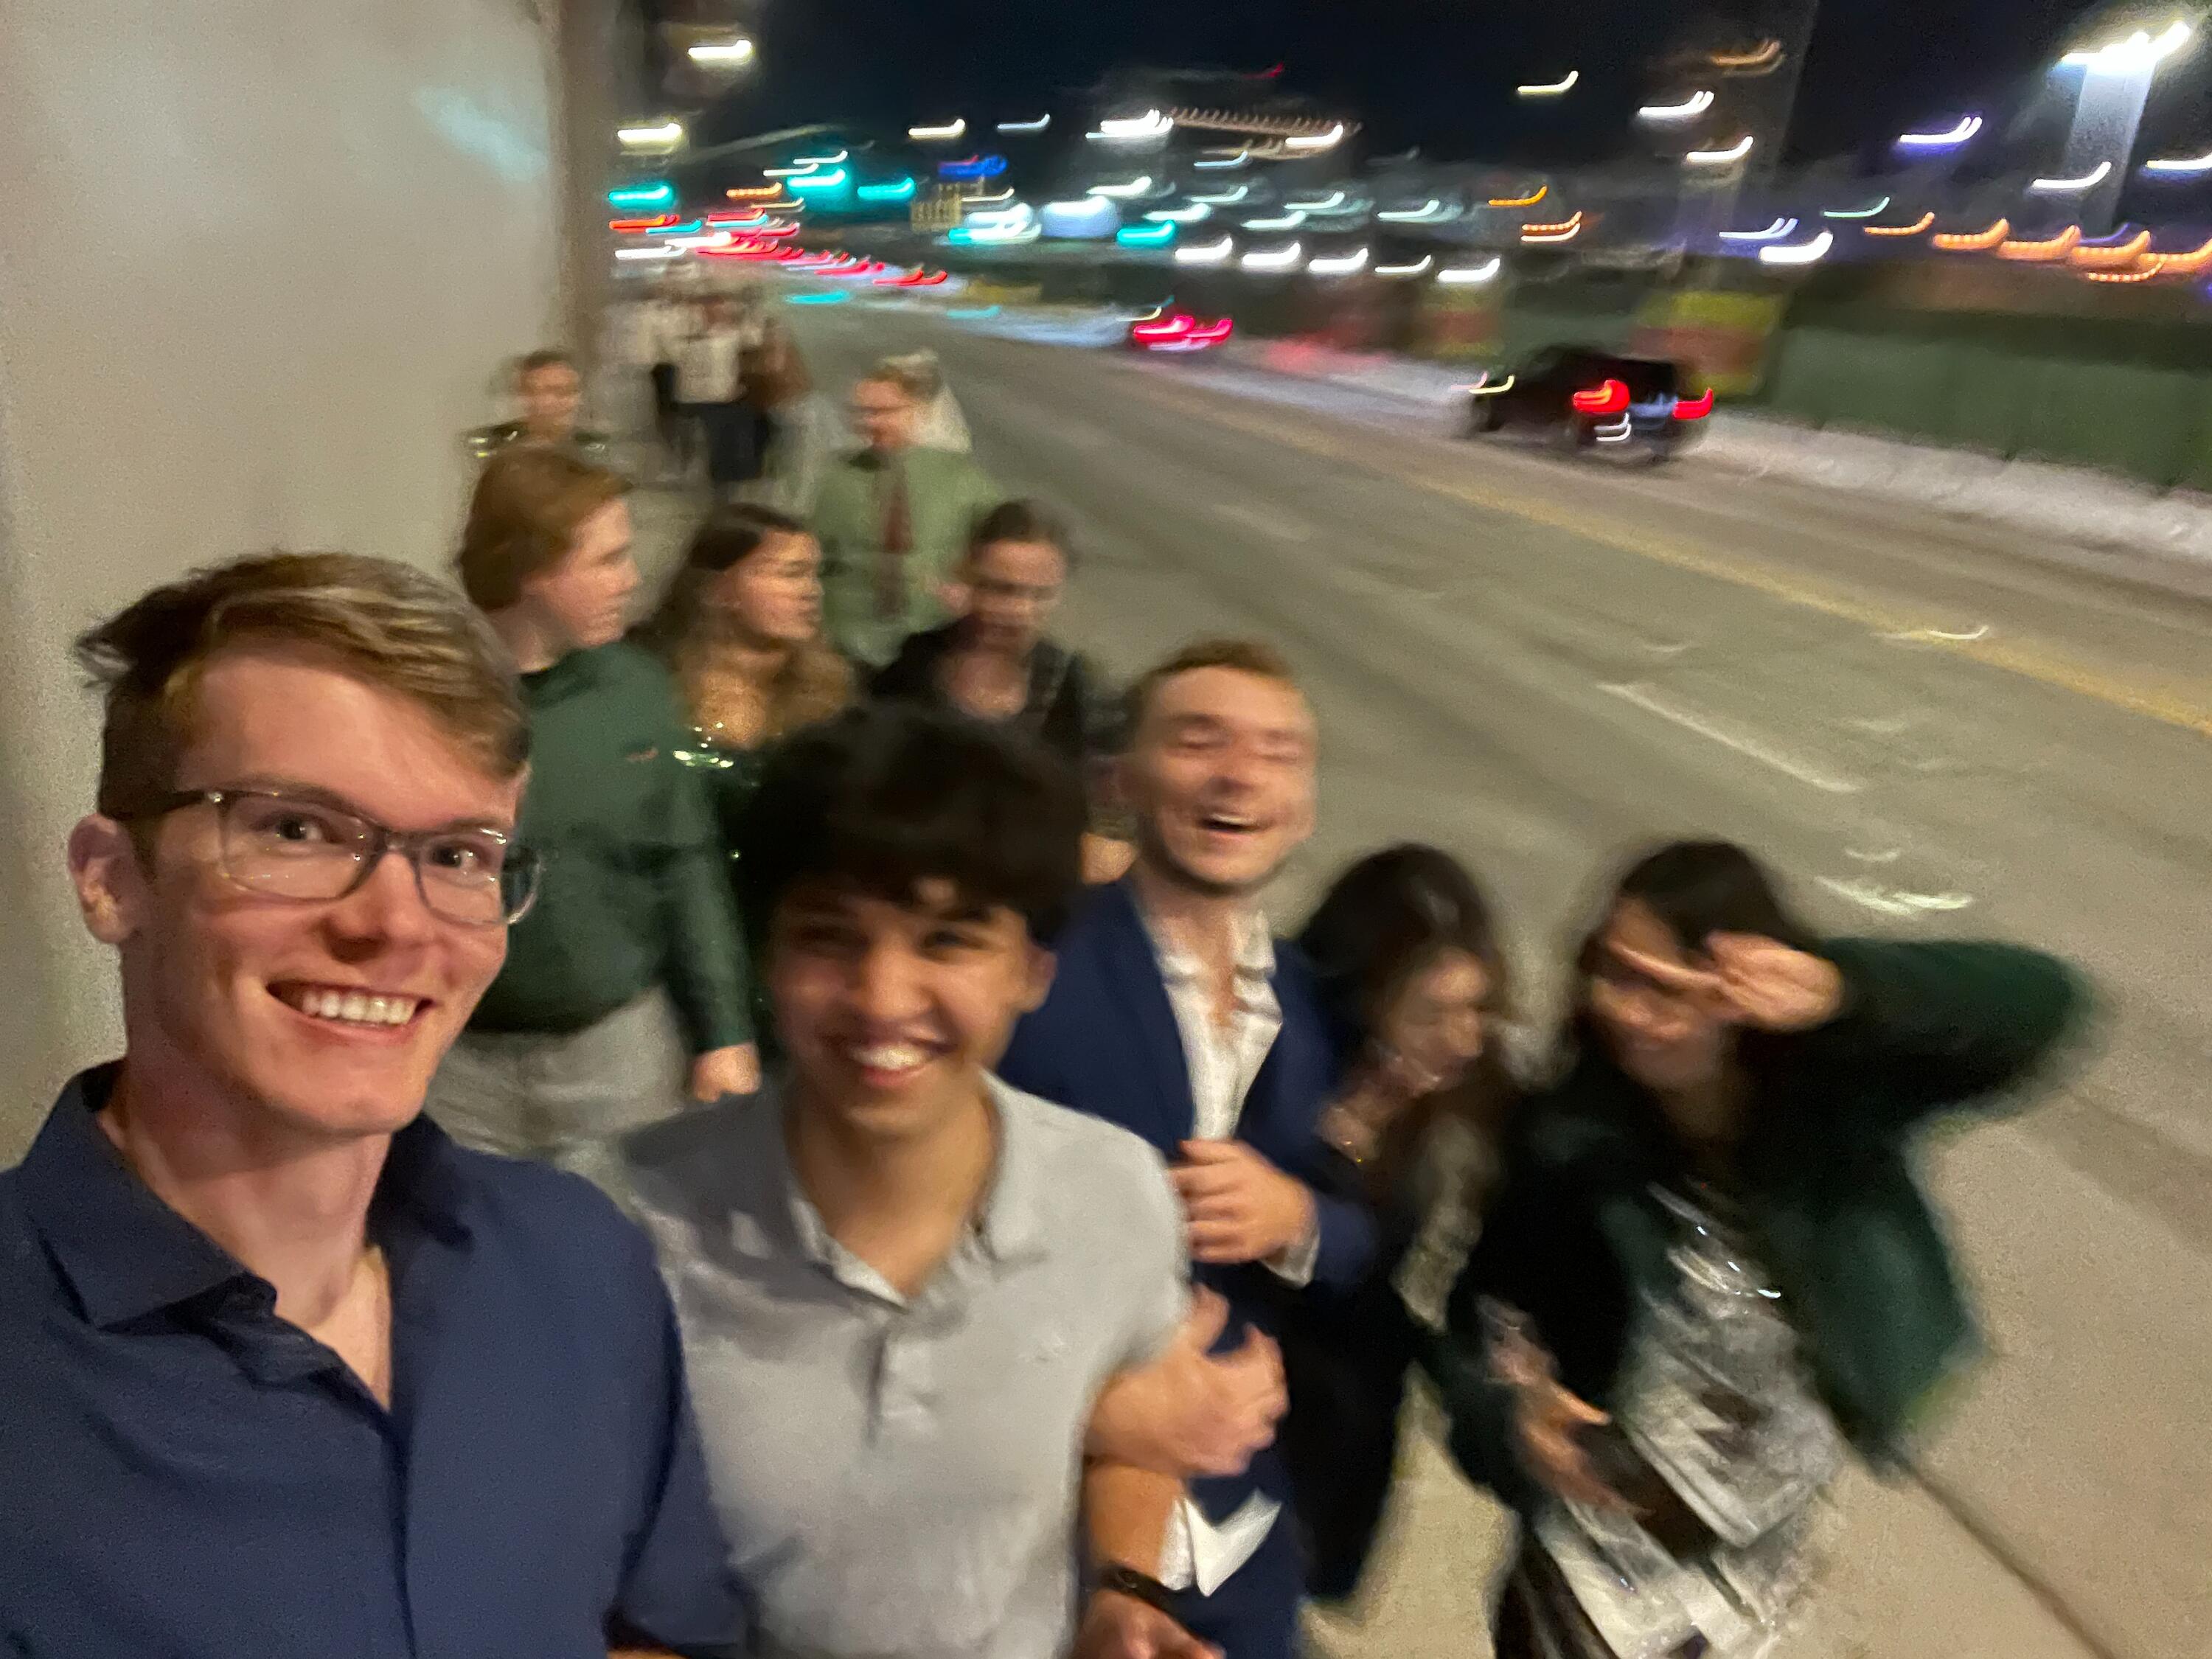 Sam and friends in downtown Los Angeles at night.